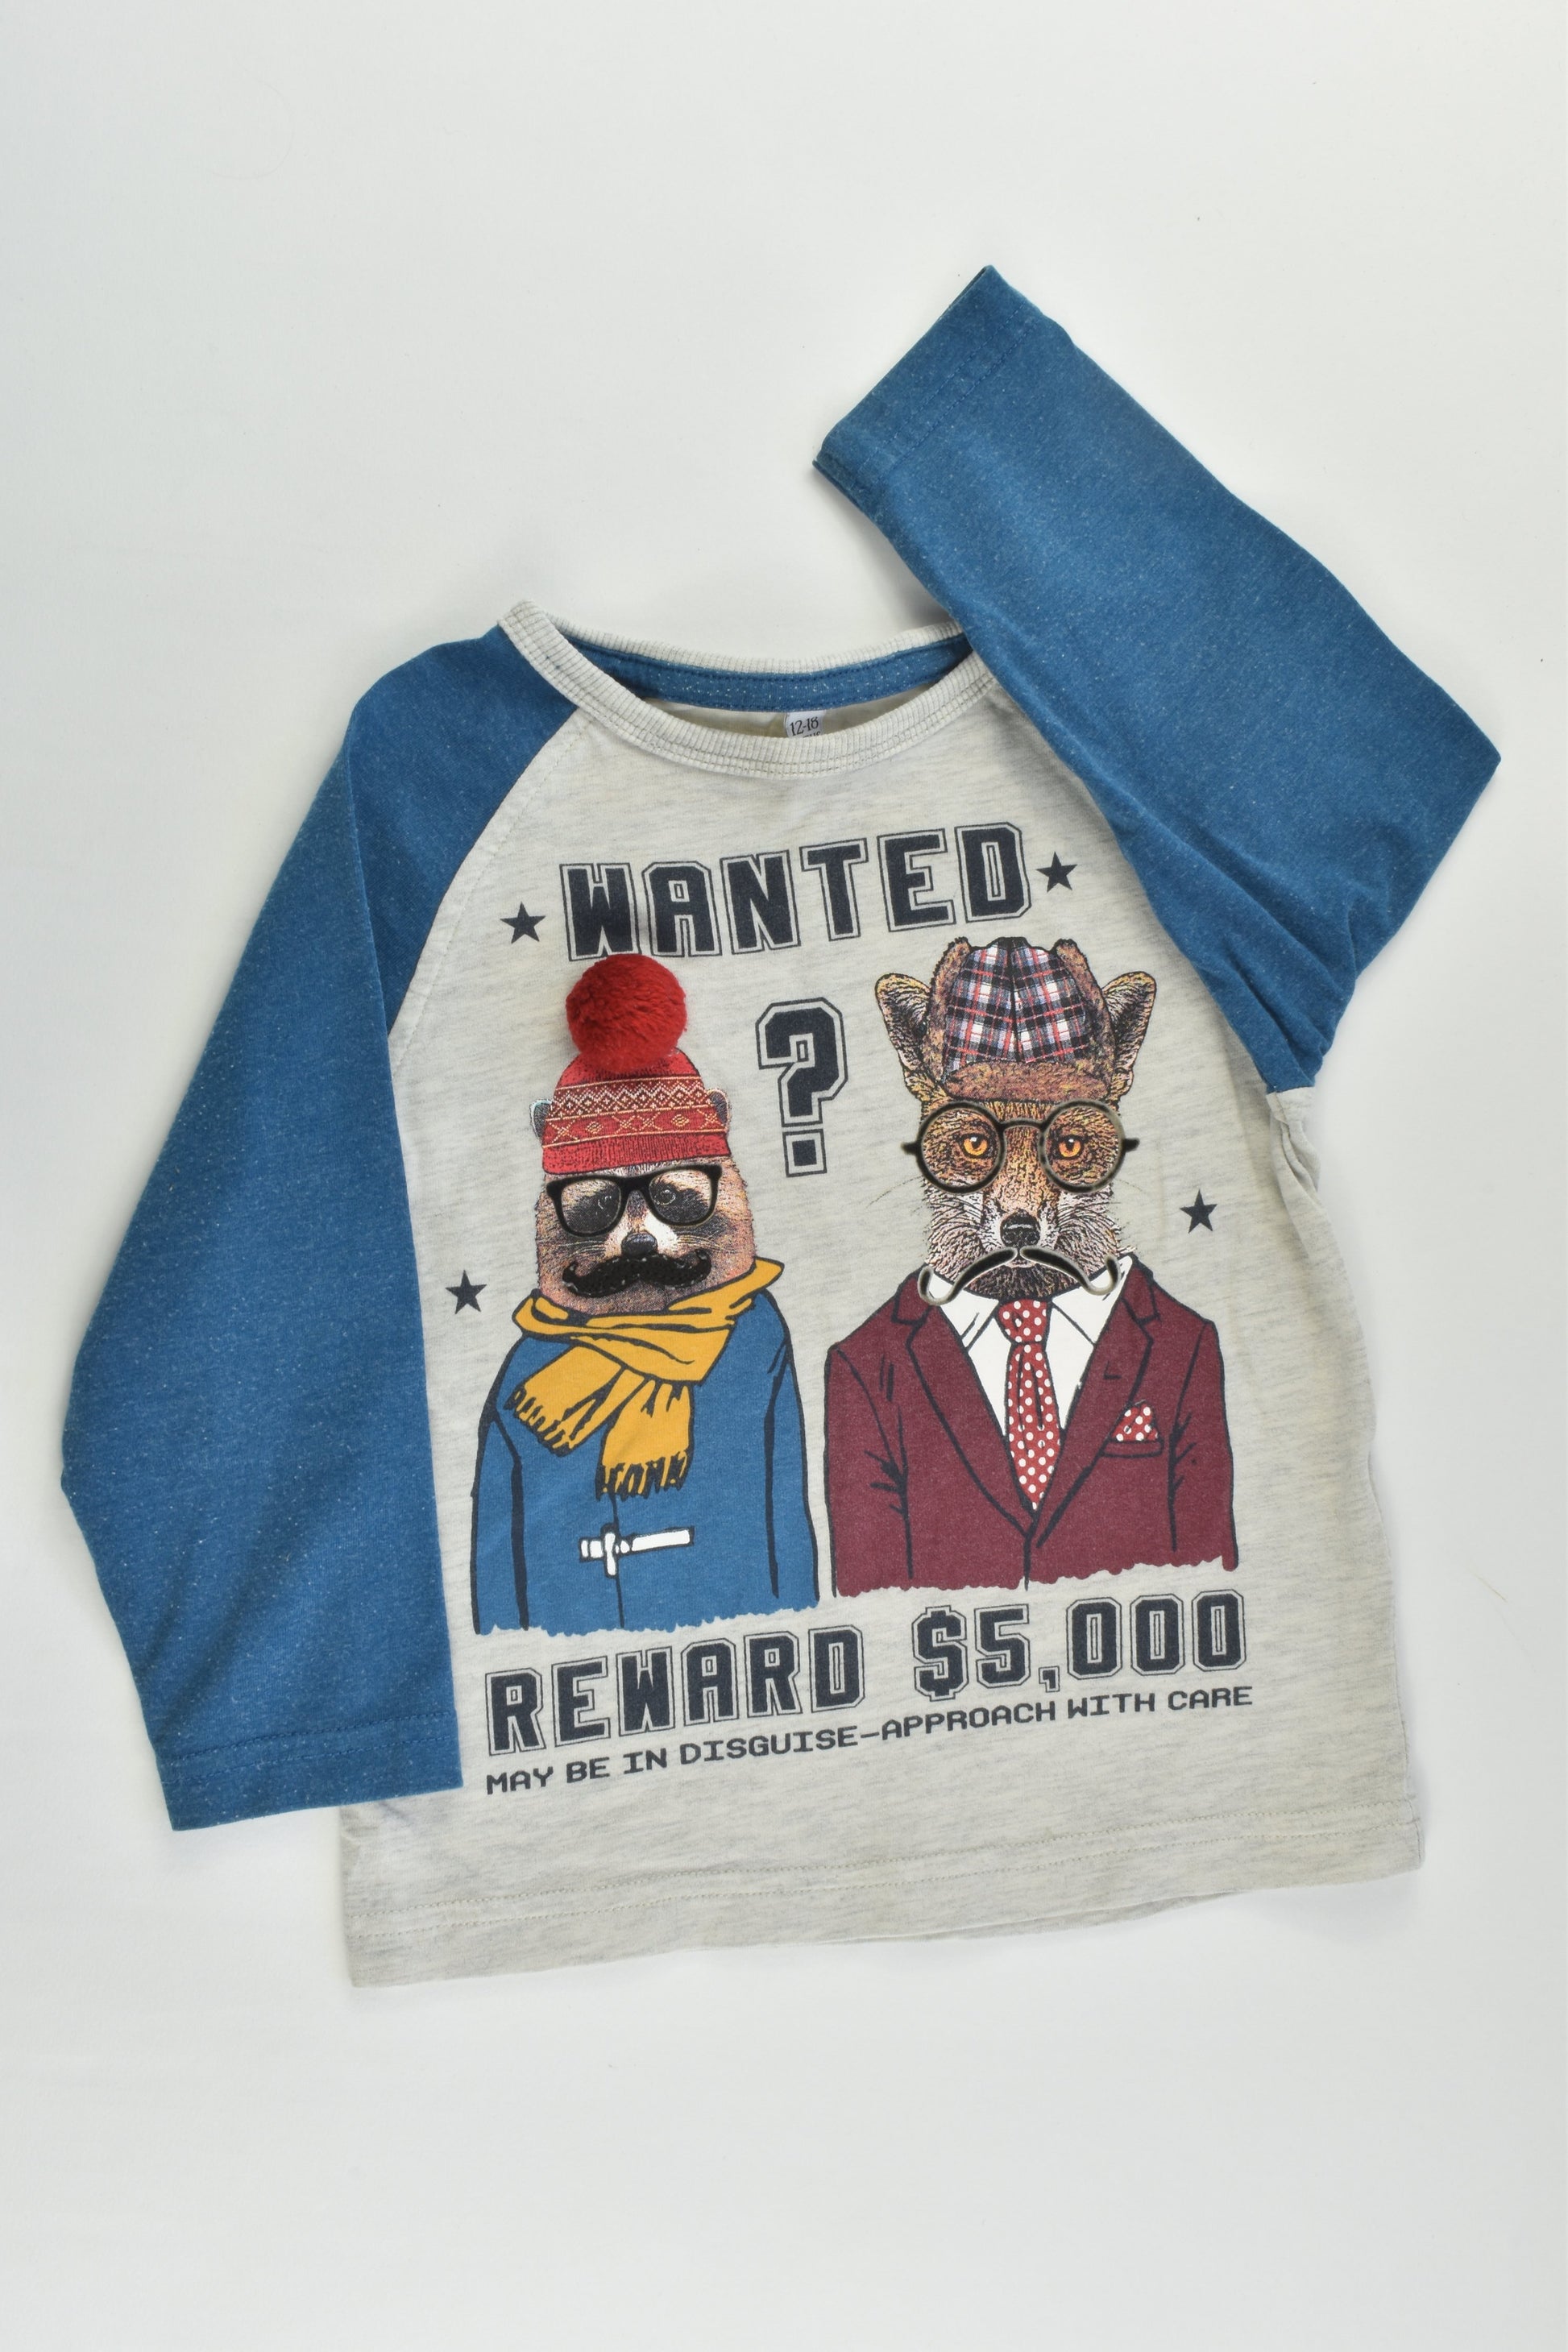 Marks & Spencer Size 1 (12-18 months) 'Wanted?' Top